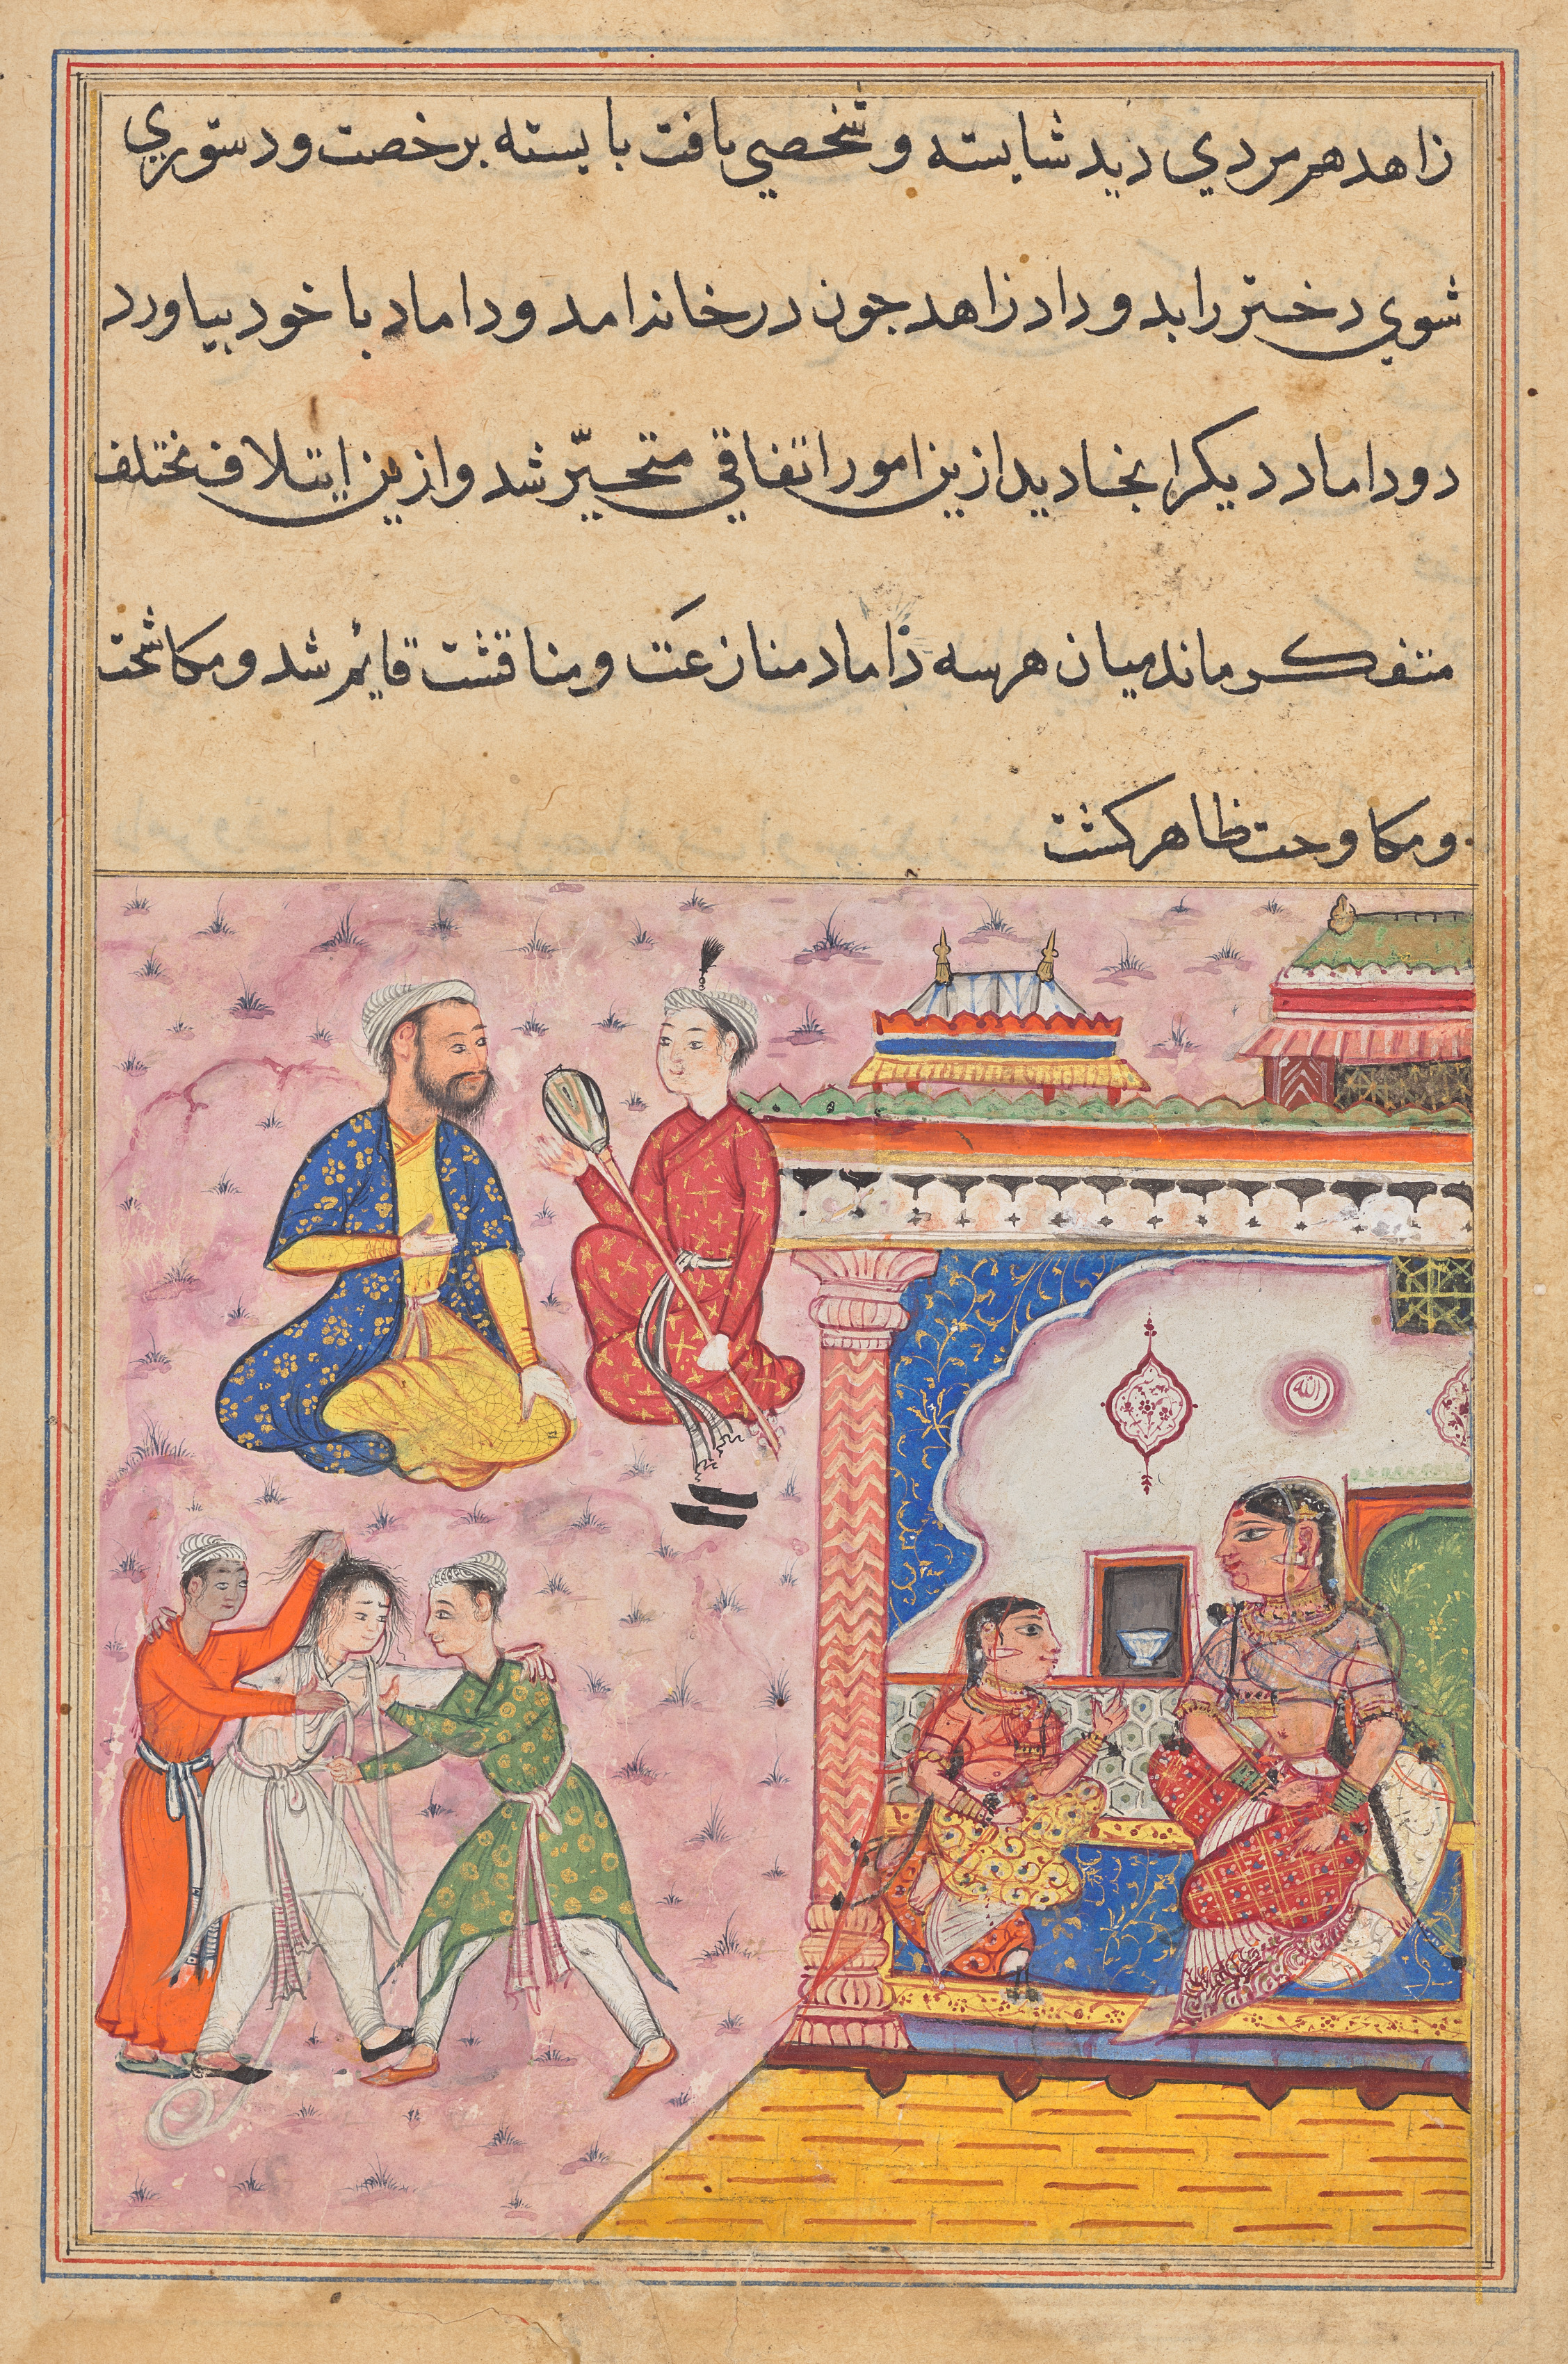 Three suitors fight amongst themselves for the hand of the devotee’s daughter, from a Tuti-nama (Tales of a Parrot): Twentieth Night